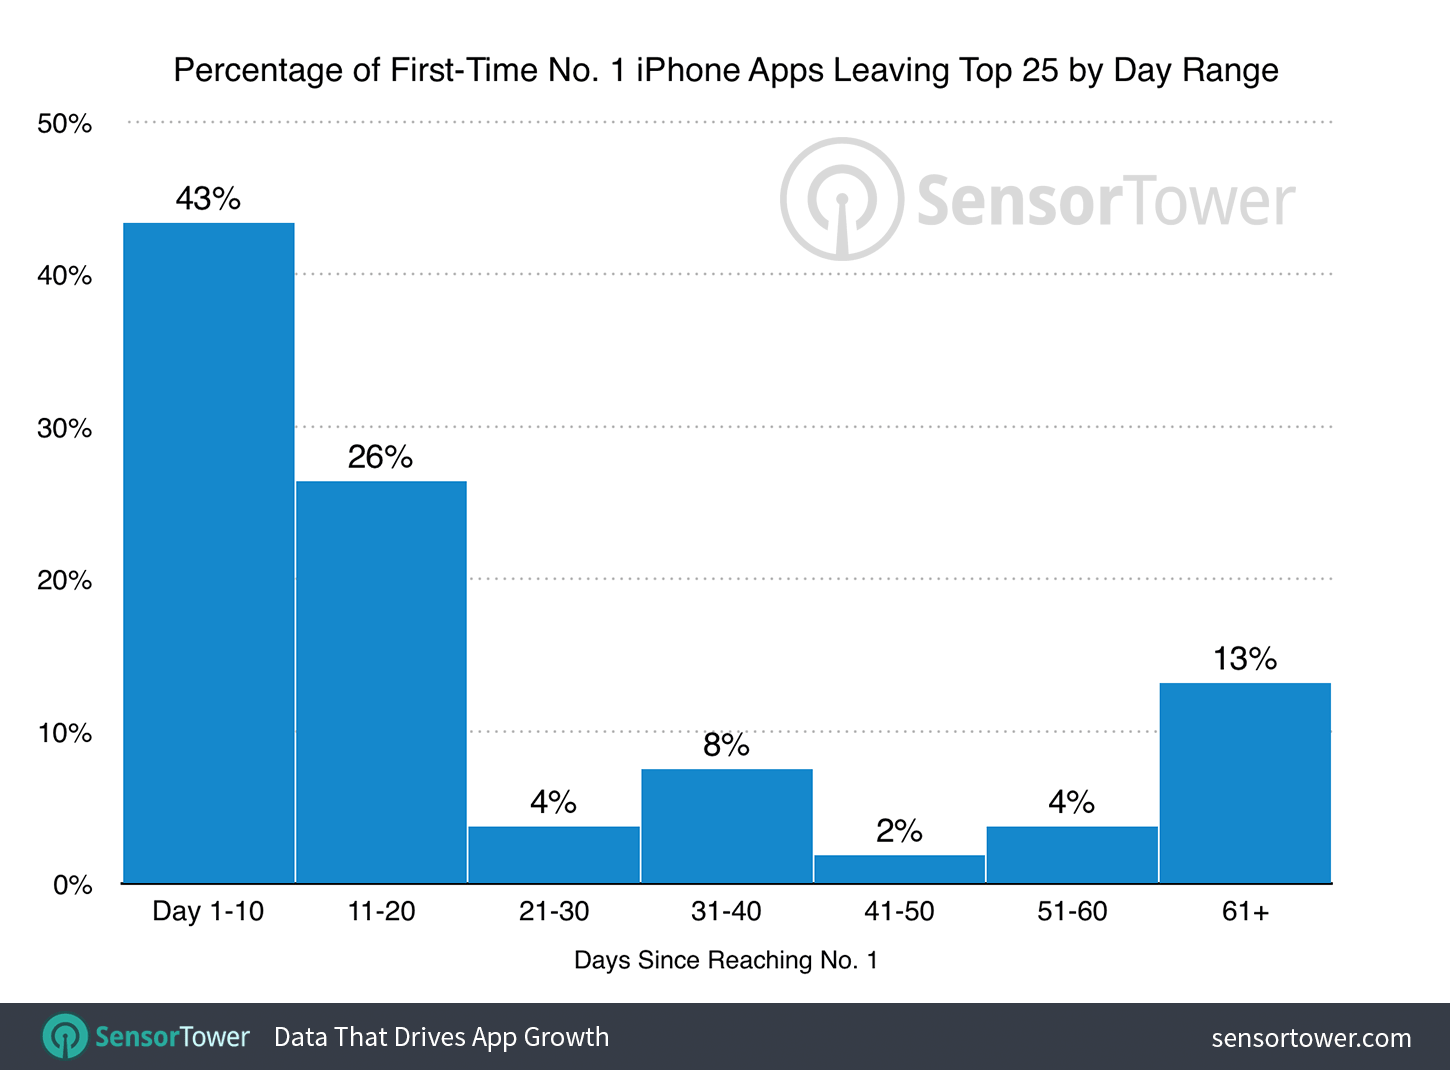 Percentage of No. 1 iPhone apps that leave the top 25 by day range